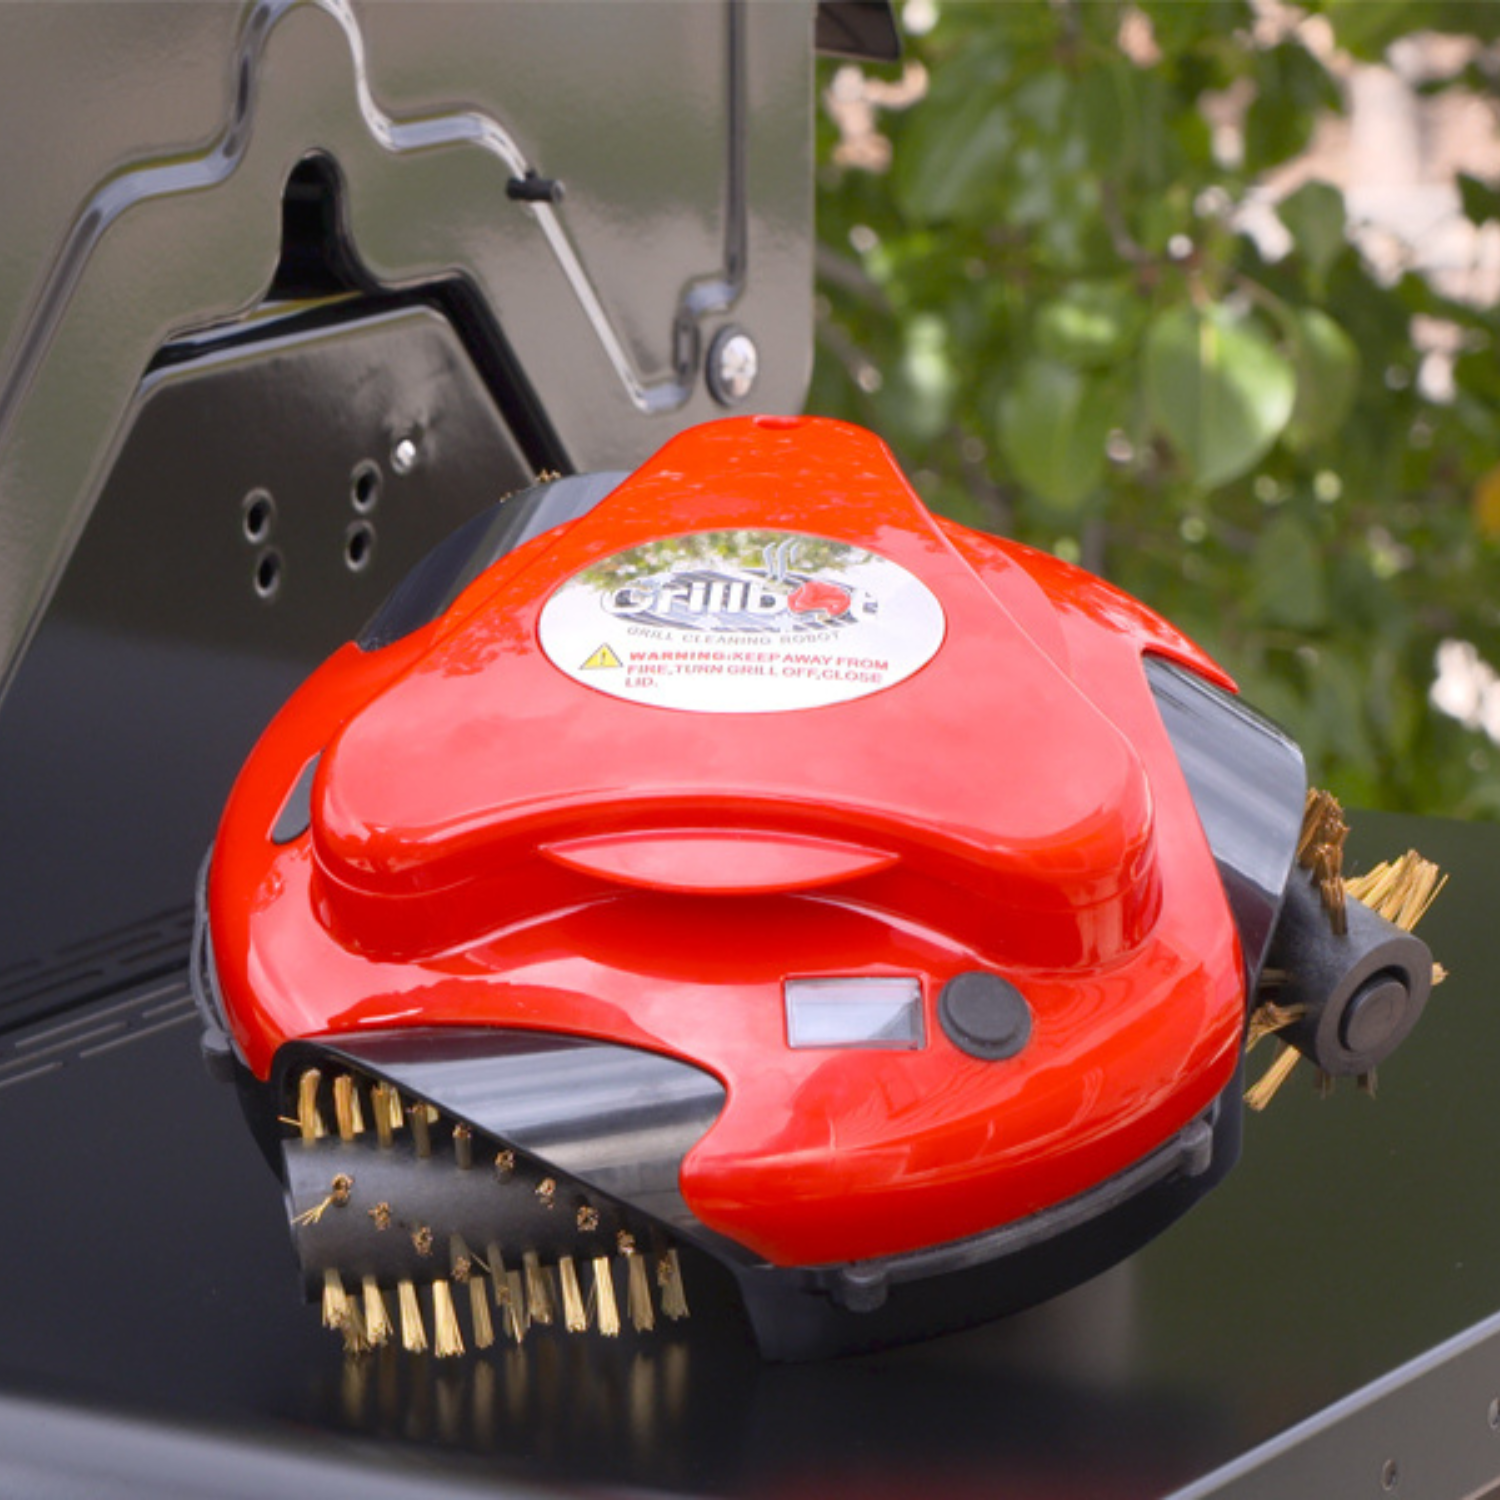 Grillbot Automatic Grill Cleaning Robot (Red)